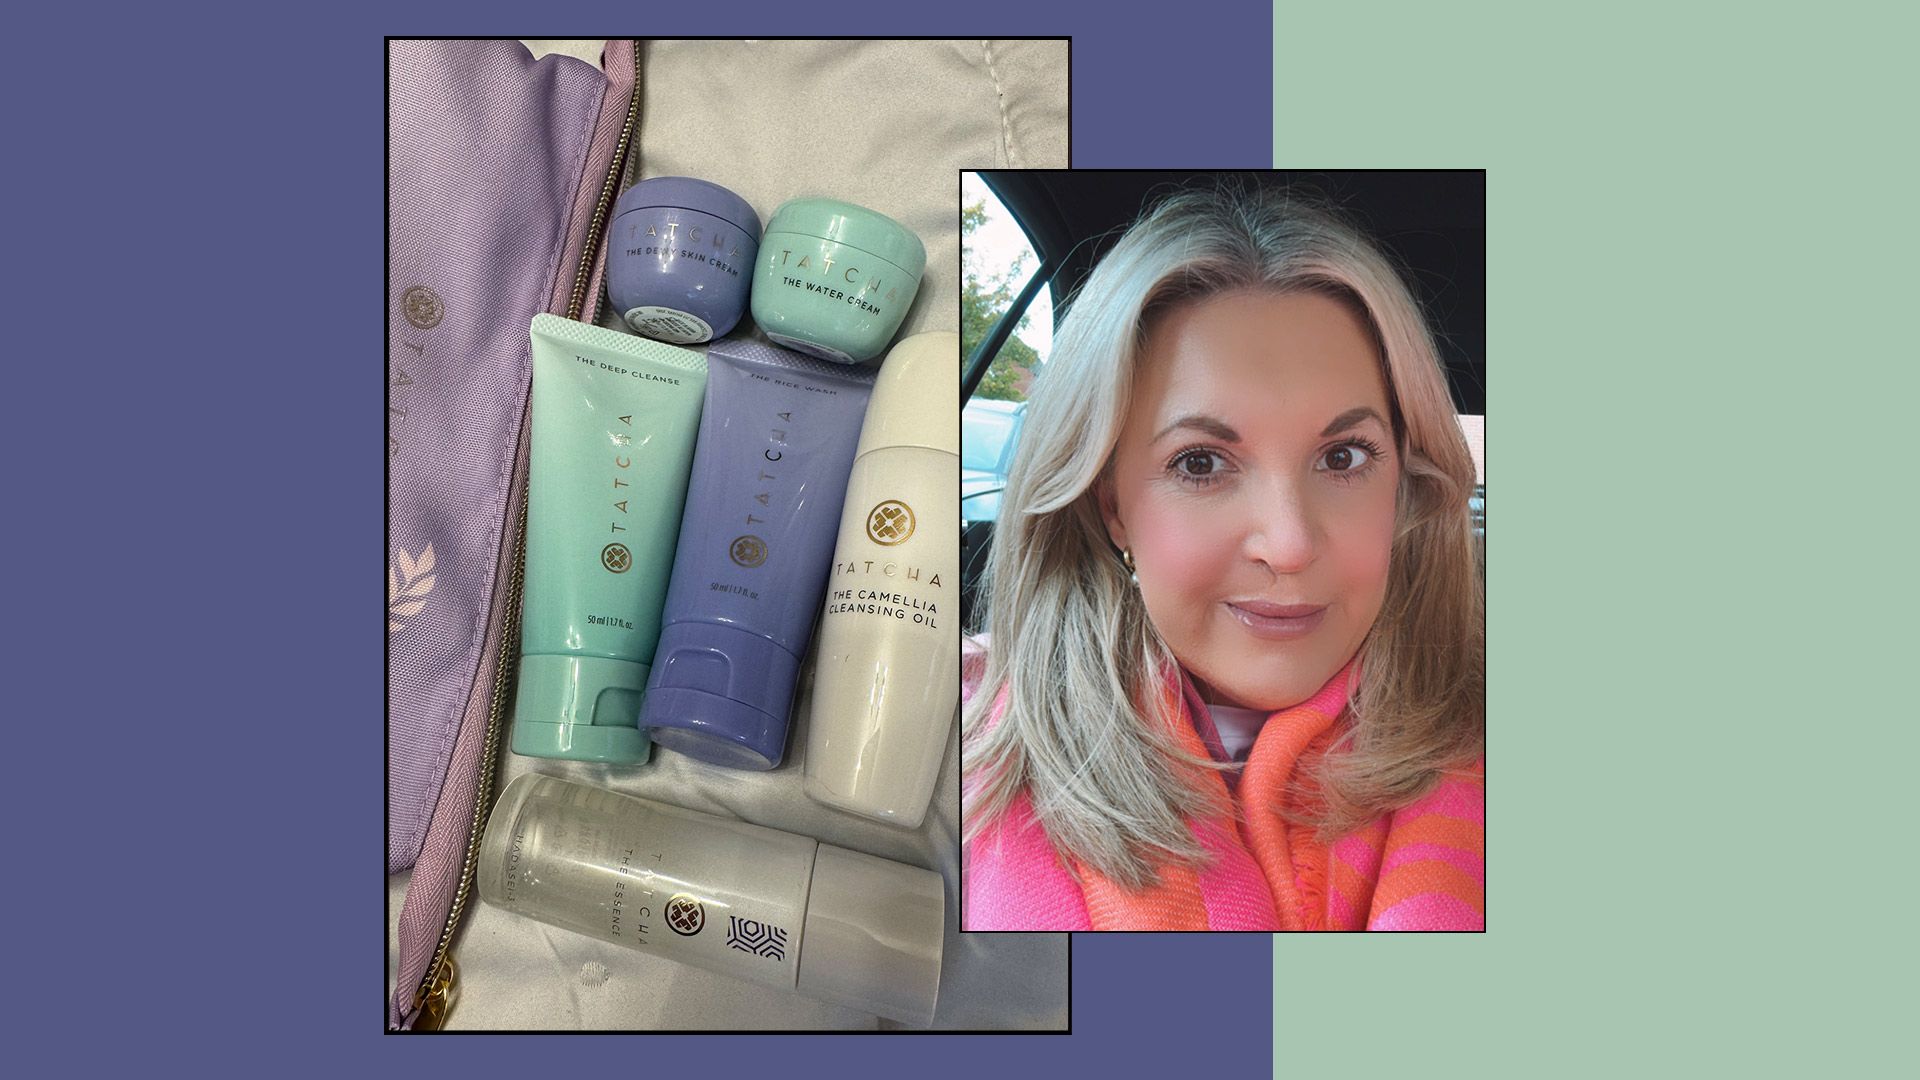 tatcha tried and tested - photo of products and reviewer leanne bayley